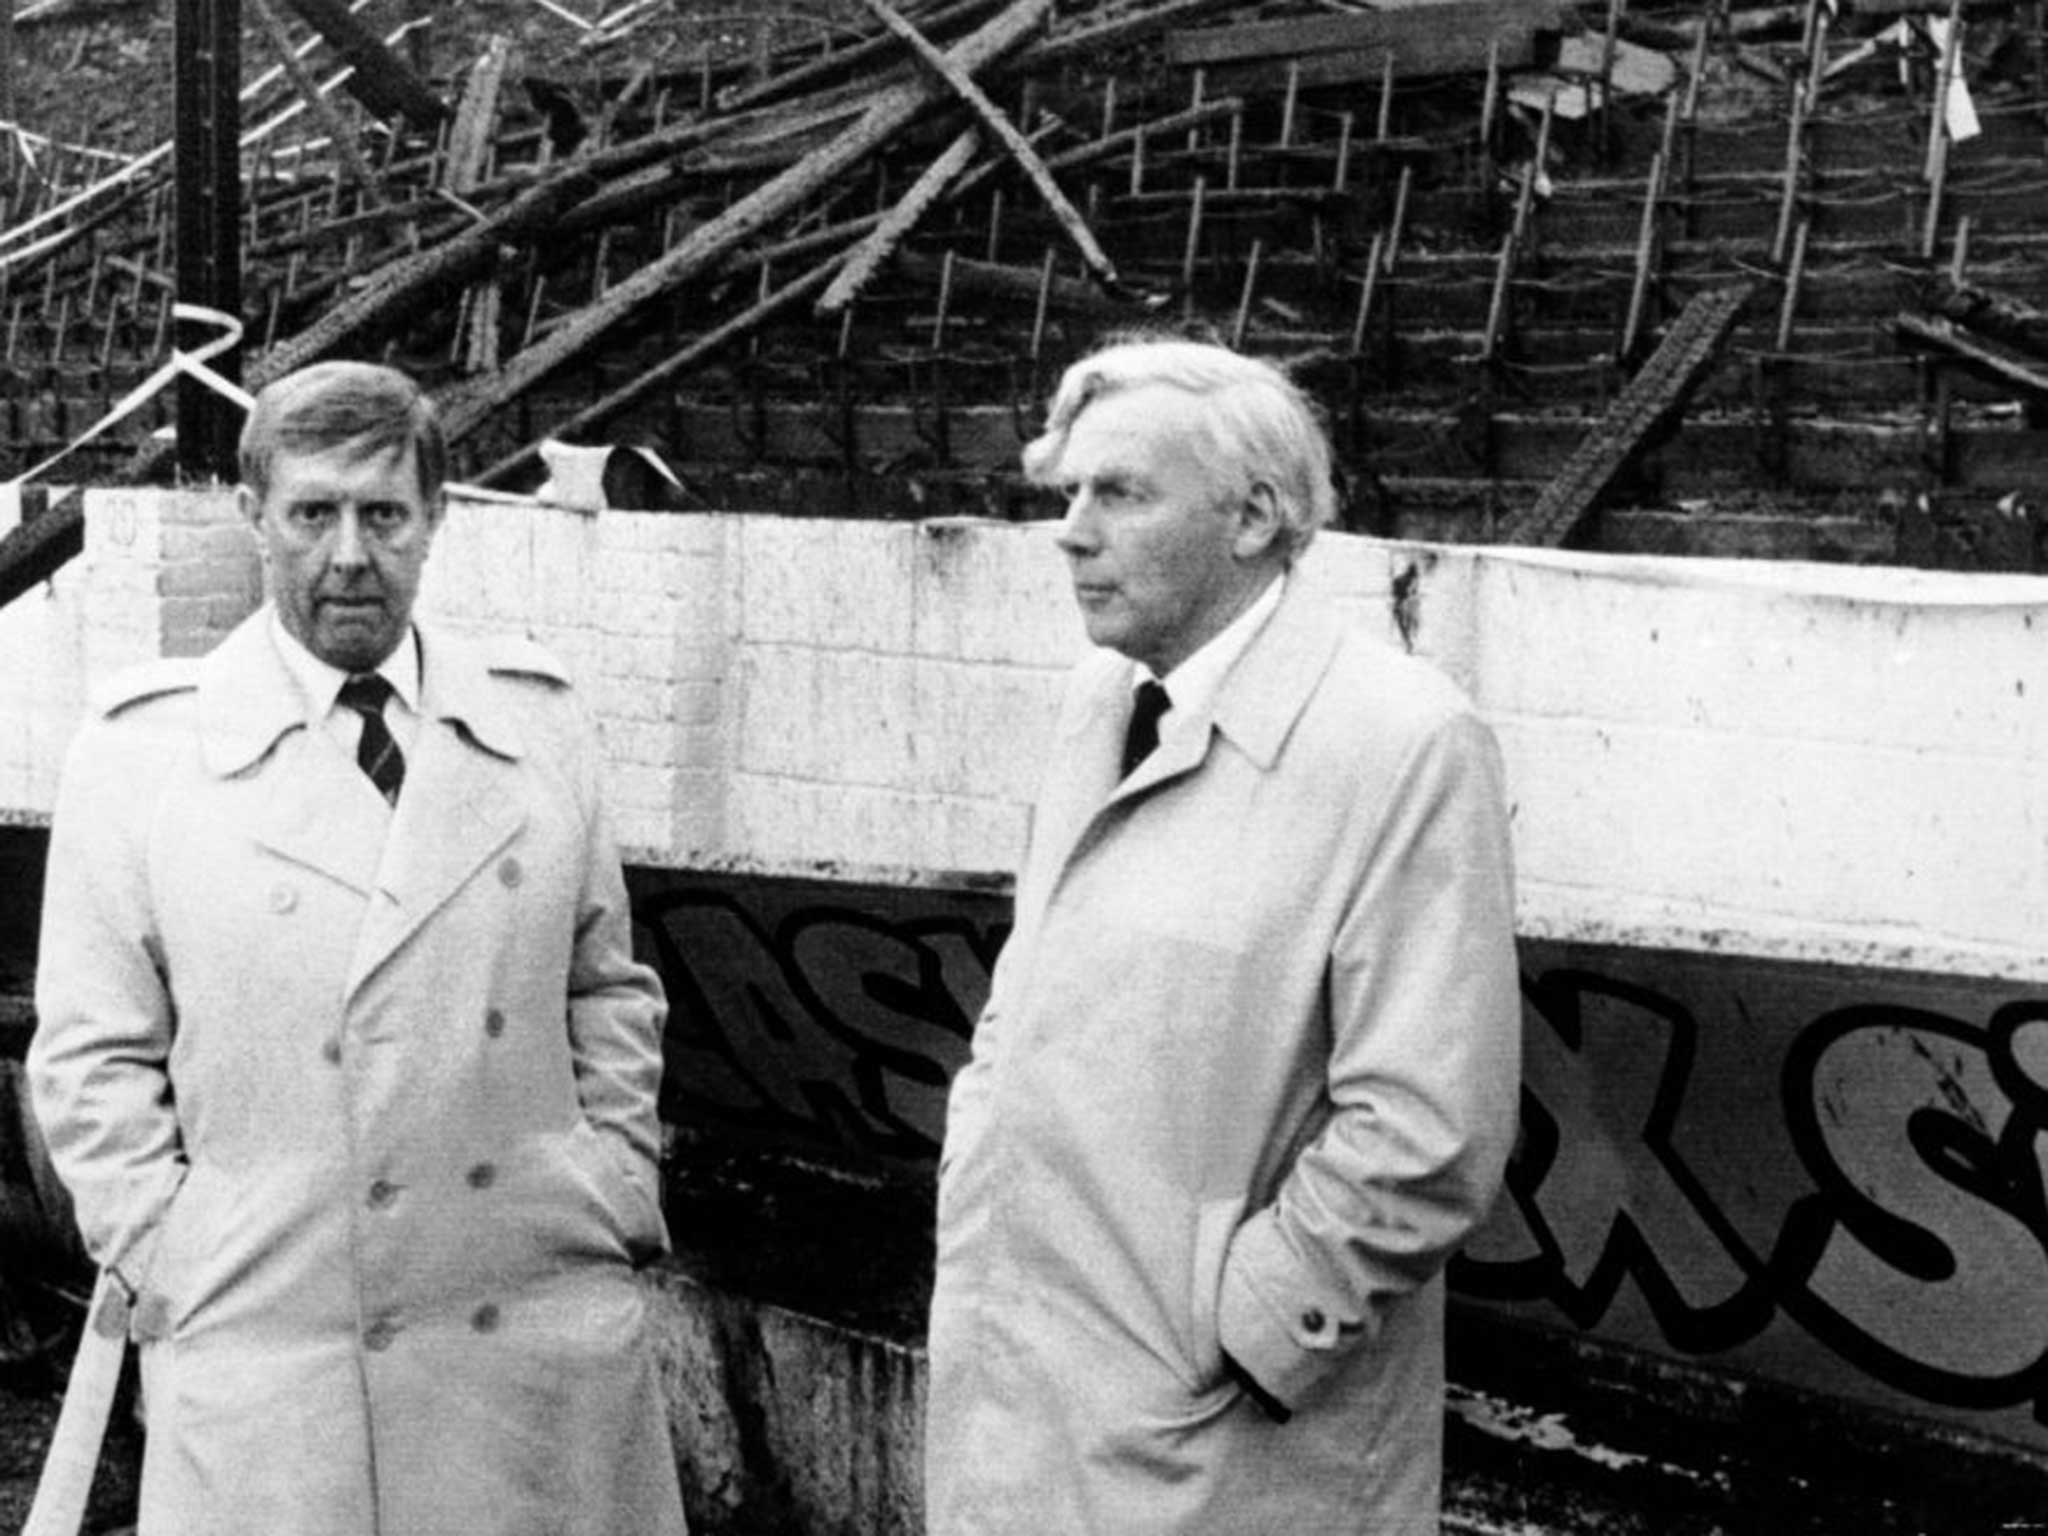 Bradford City FC chairman Stafford Heginbotham (left) with Mr Justice Popplewell, in front of the stand which was burnt at Bradford’s Valley Parade ground in 1985